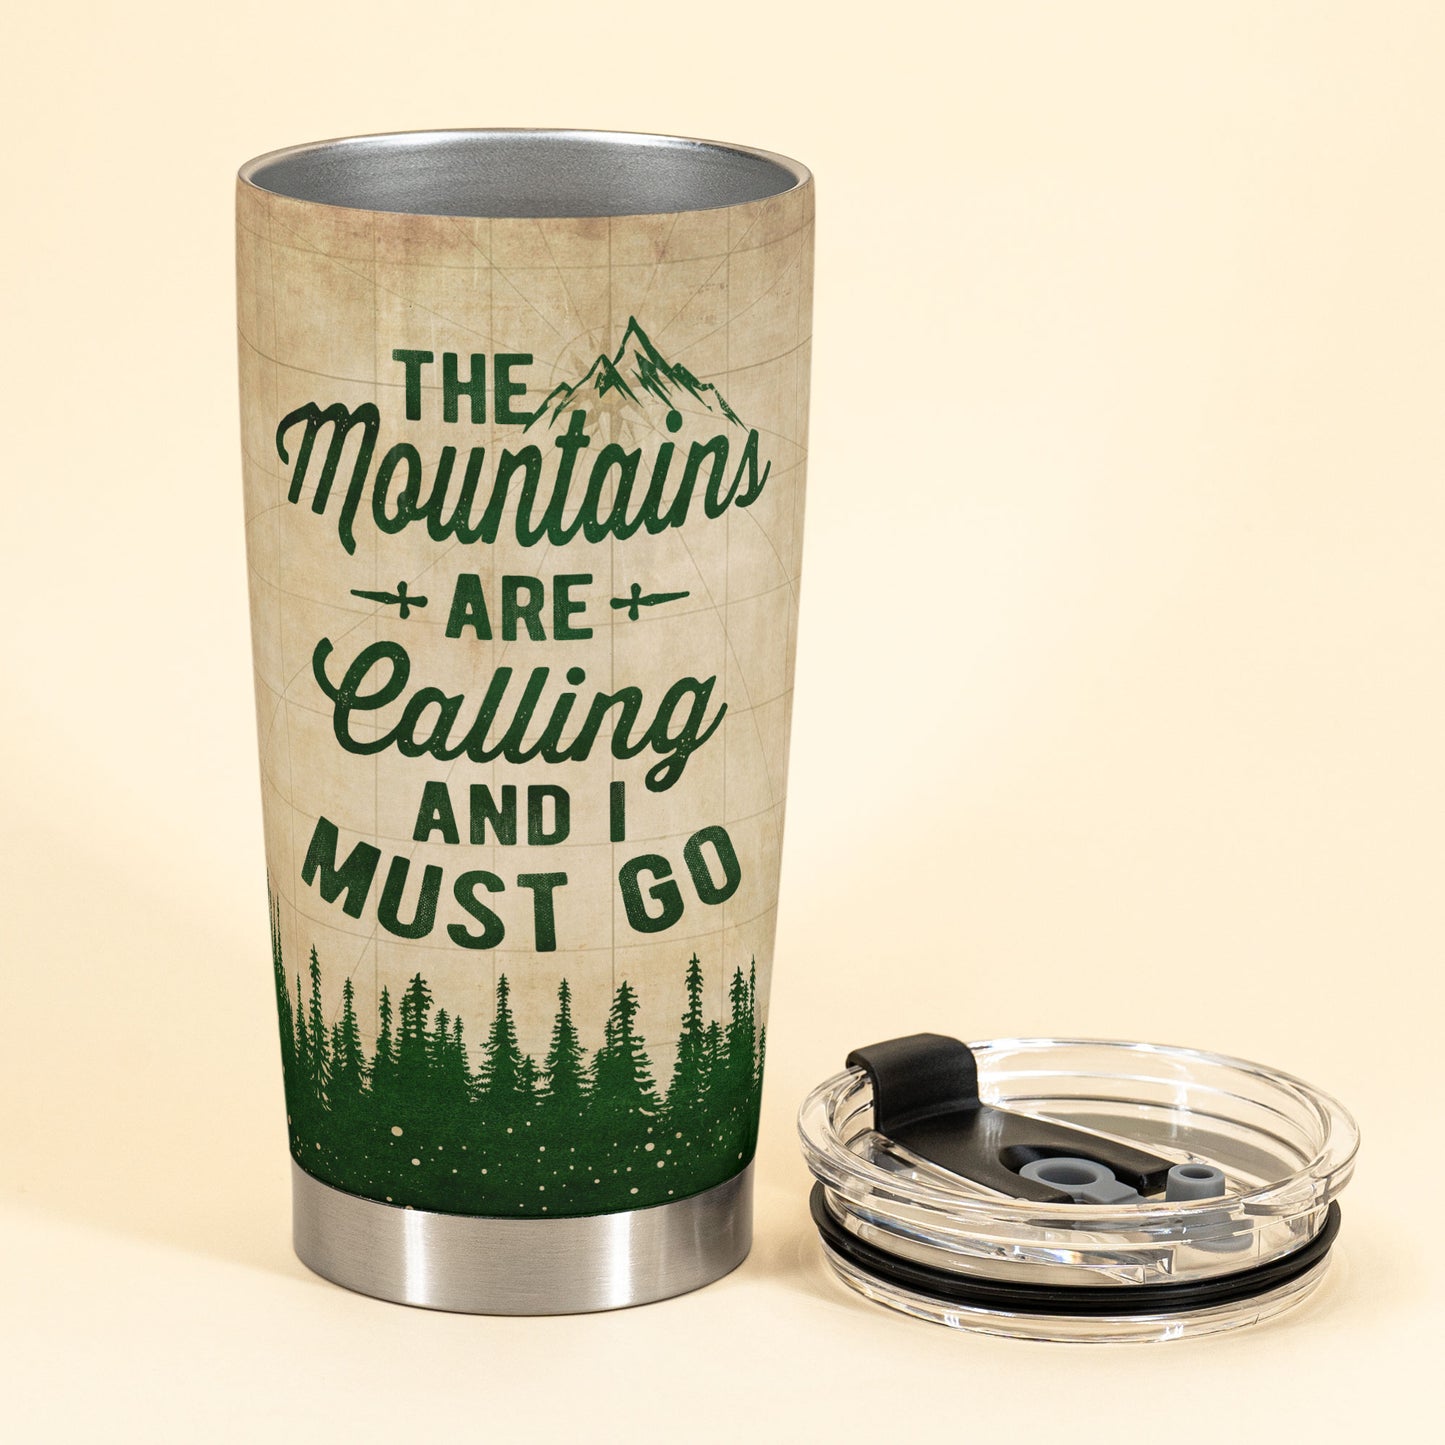 The Mountain Are Calling - Personalized Tumbler Cup - Birthday Gift For Camper, Hiker, Outdoor Enthusiast